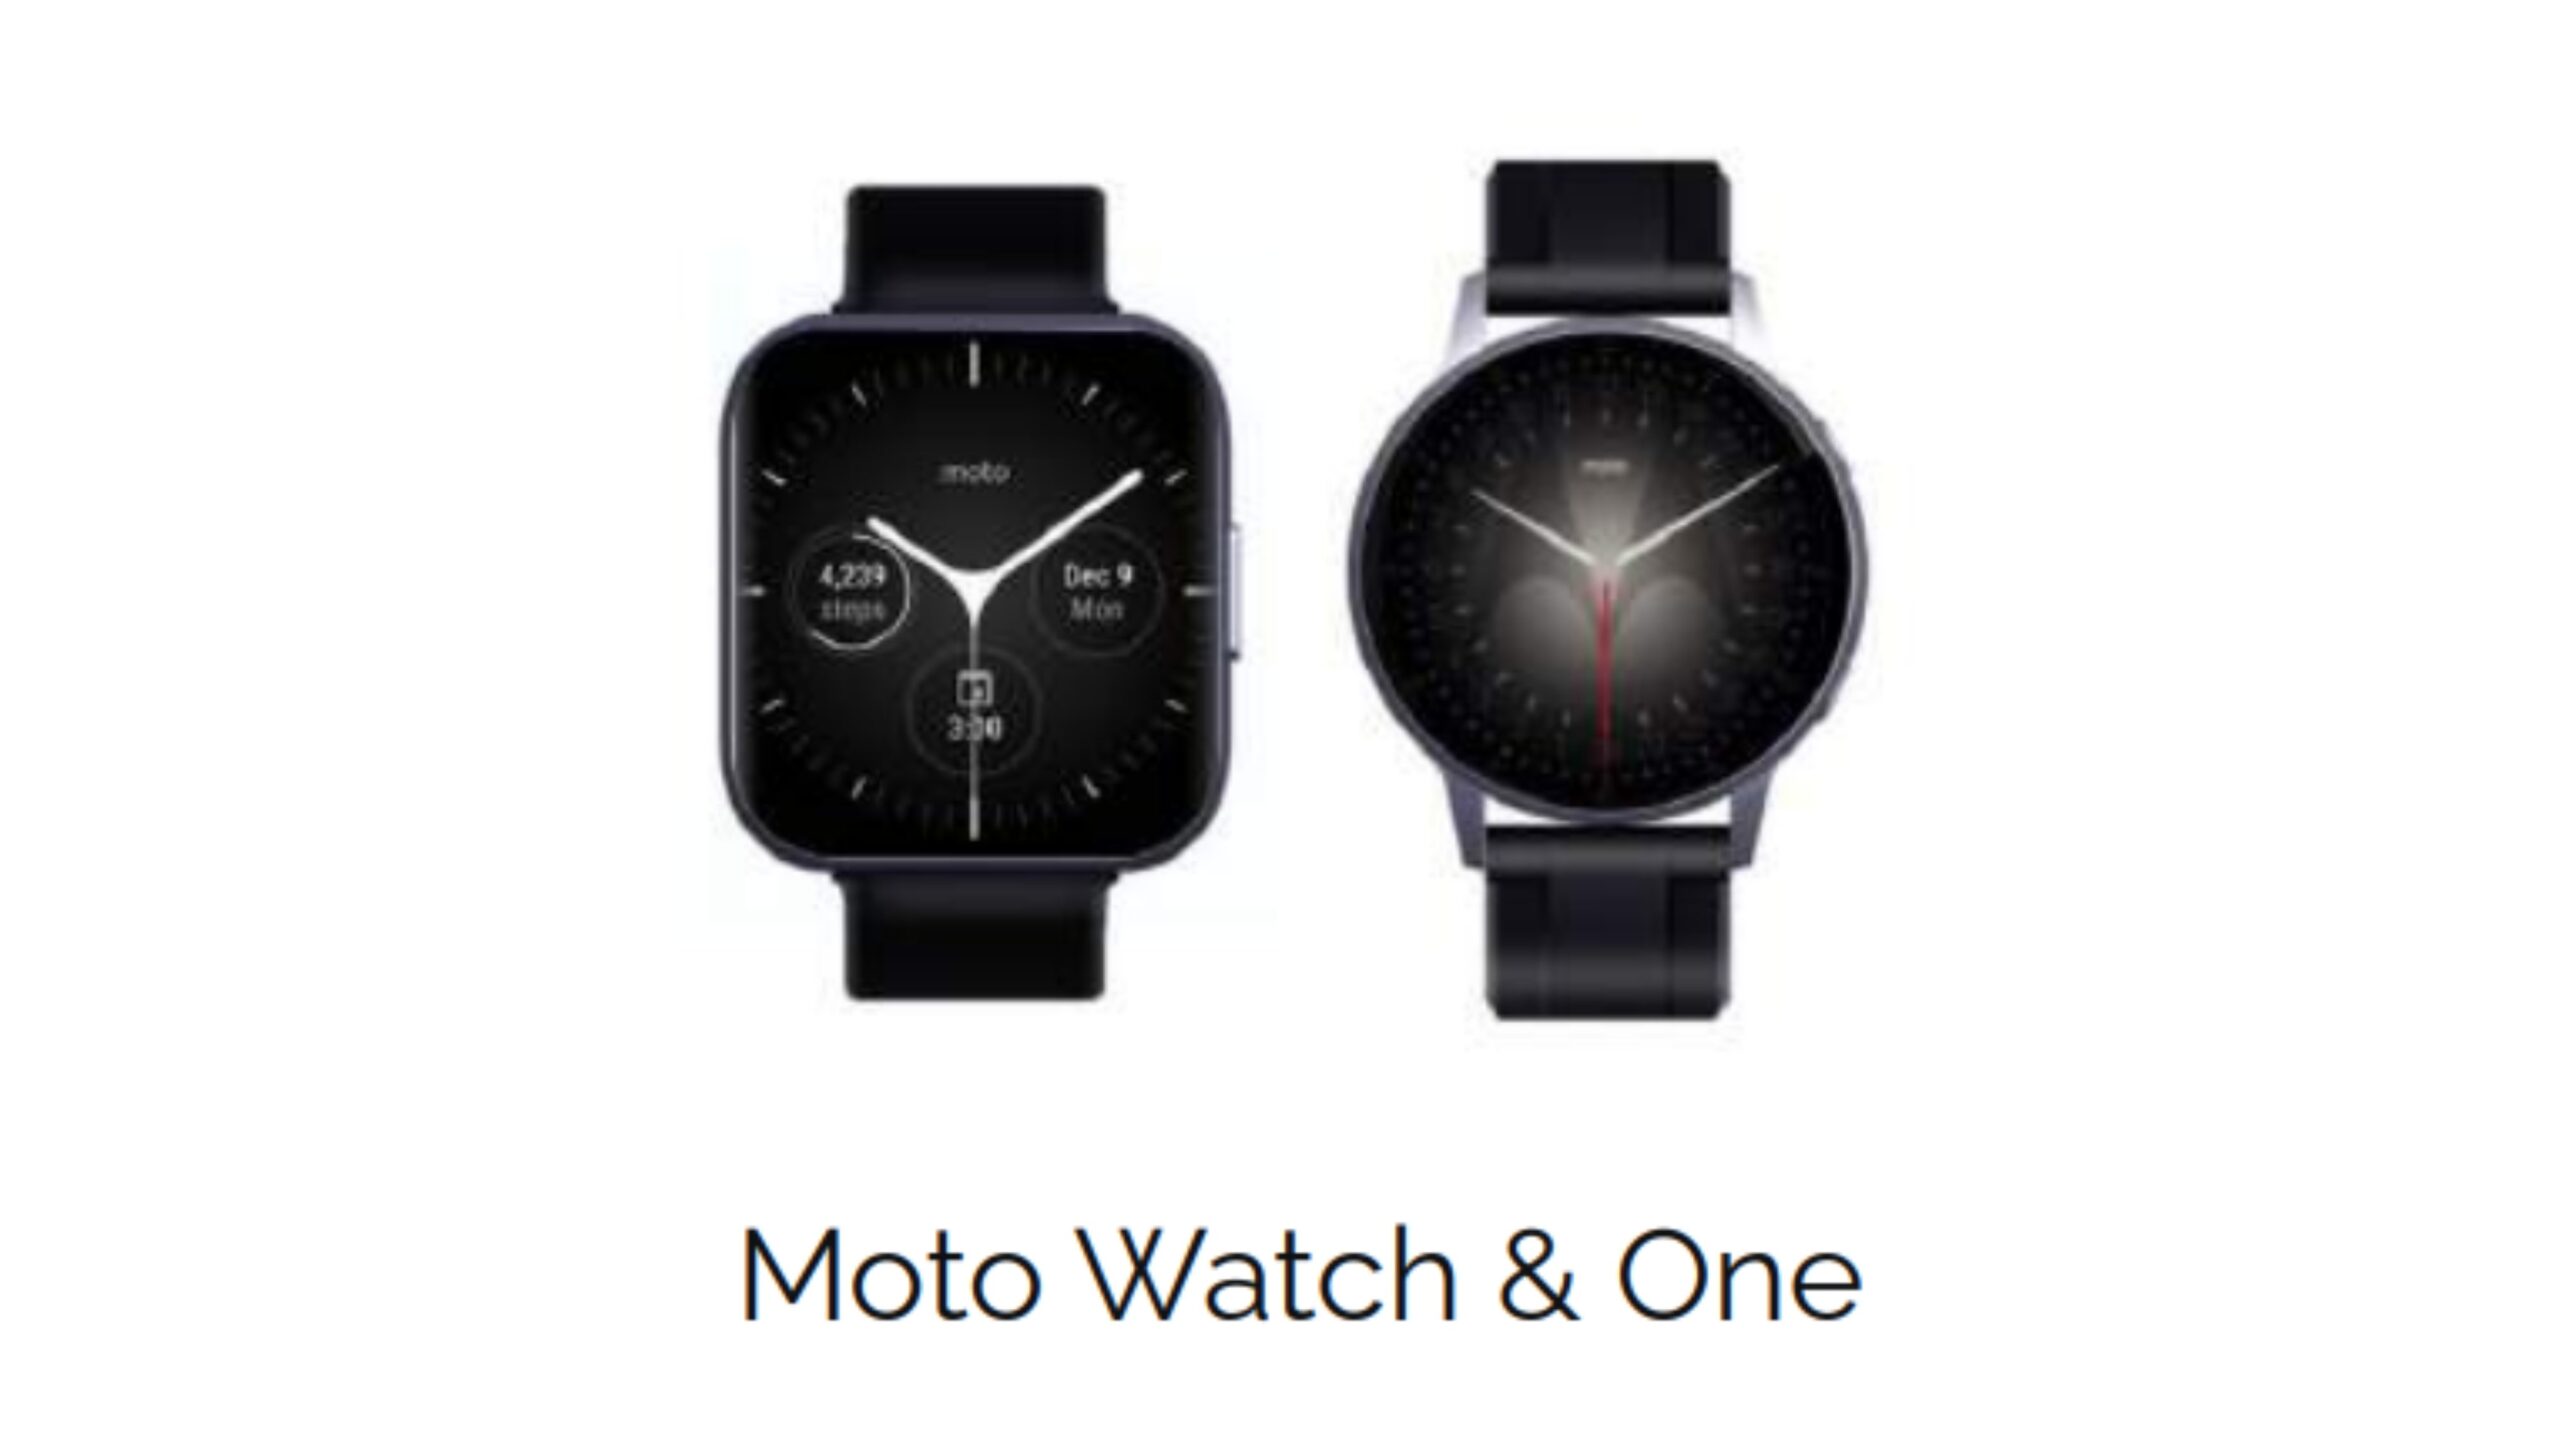 Three Moto smartwatches to launch in 2021: Moto Watch, Moto Watch One, & Moto G Smartwatch